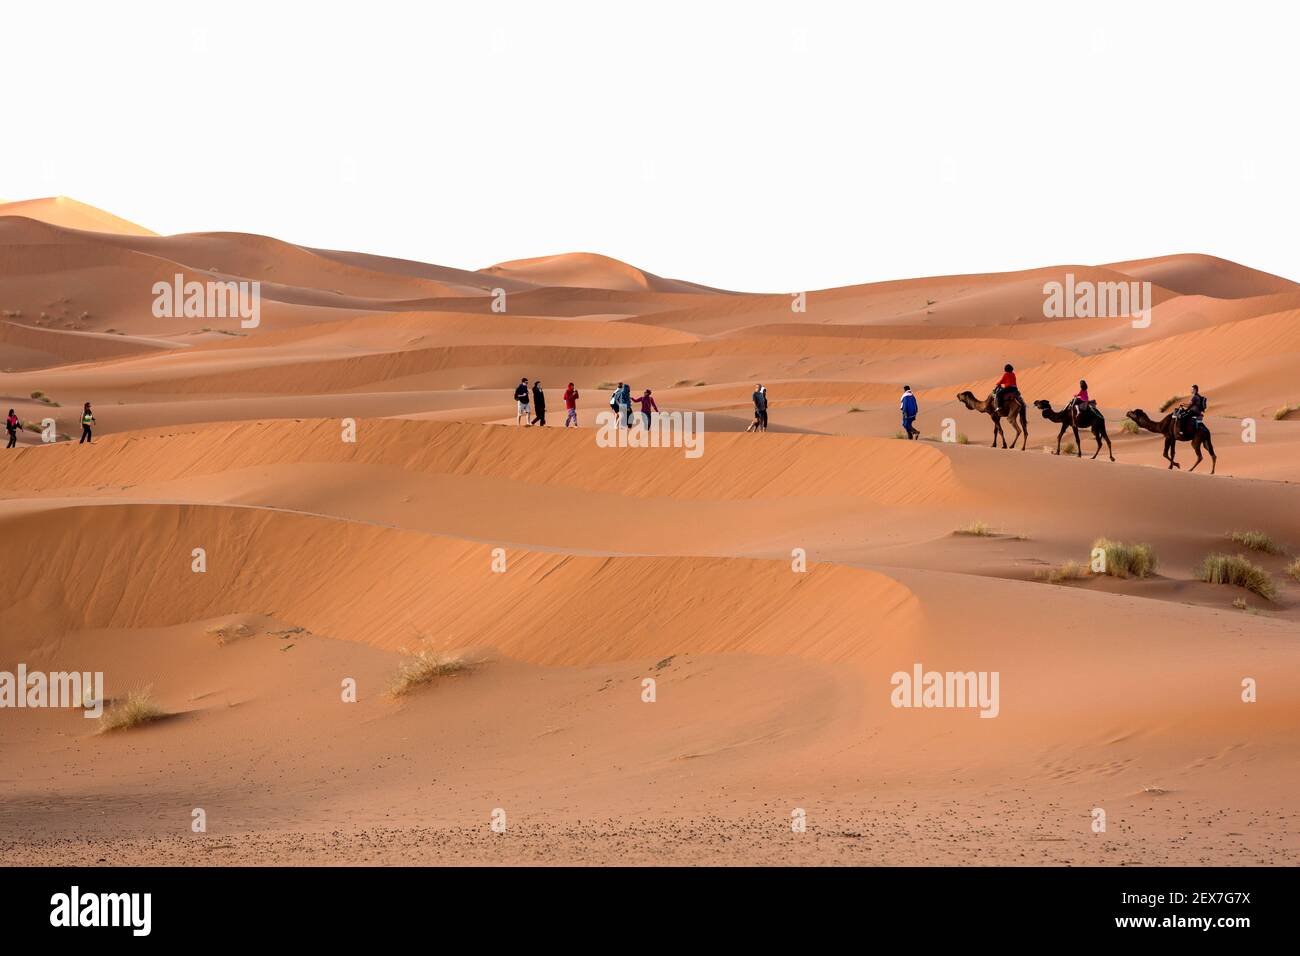 Morocco, Erg Chebbi, sand dunes near Merzouga, people crossing the dunes on camel. The dunes can reach heights of 250 meters Stock Photo